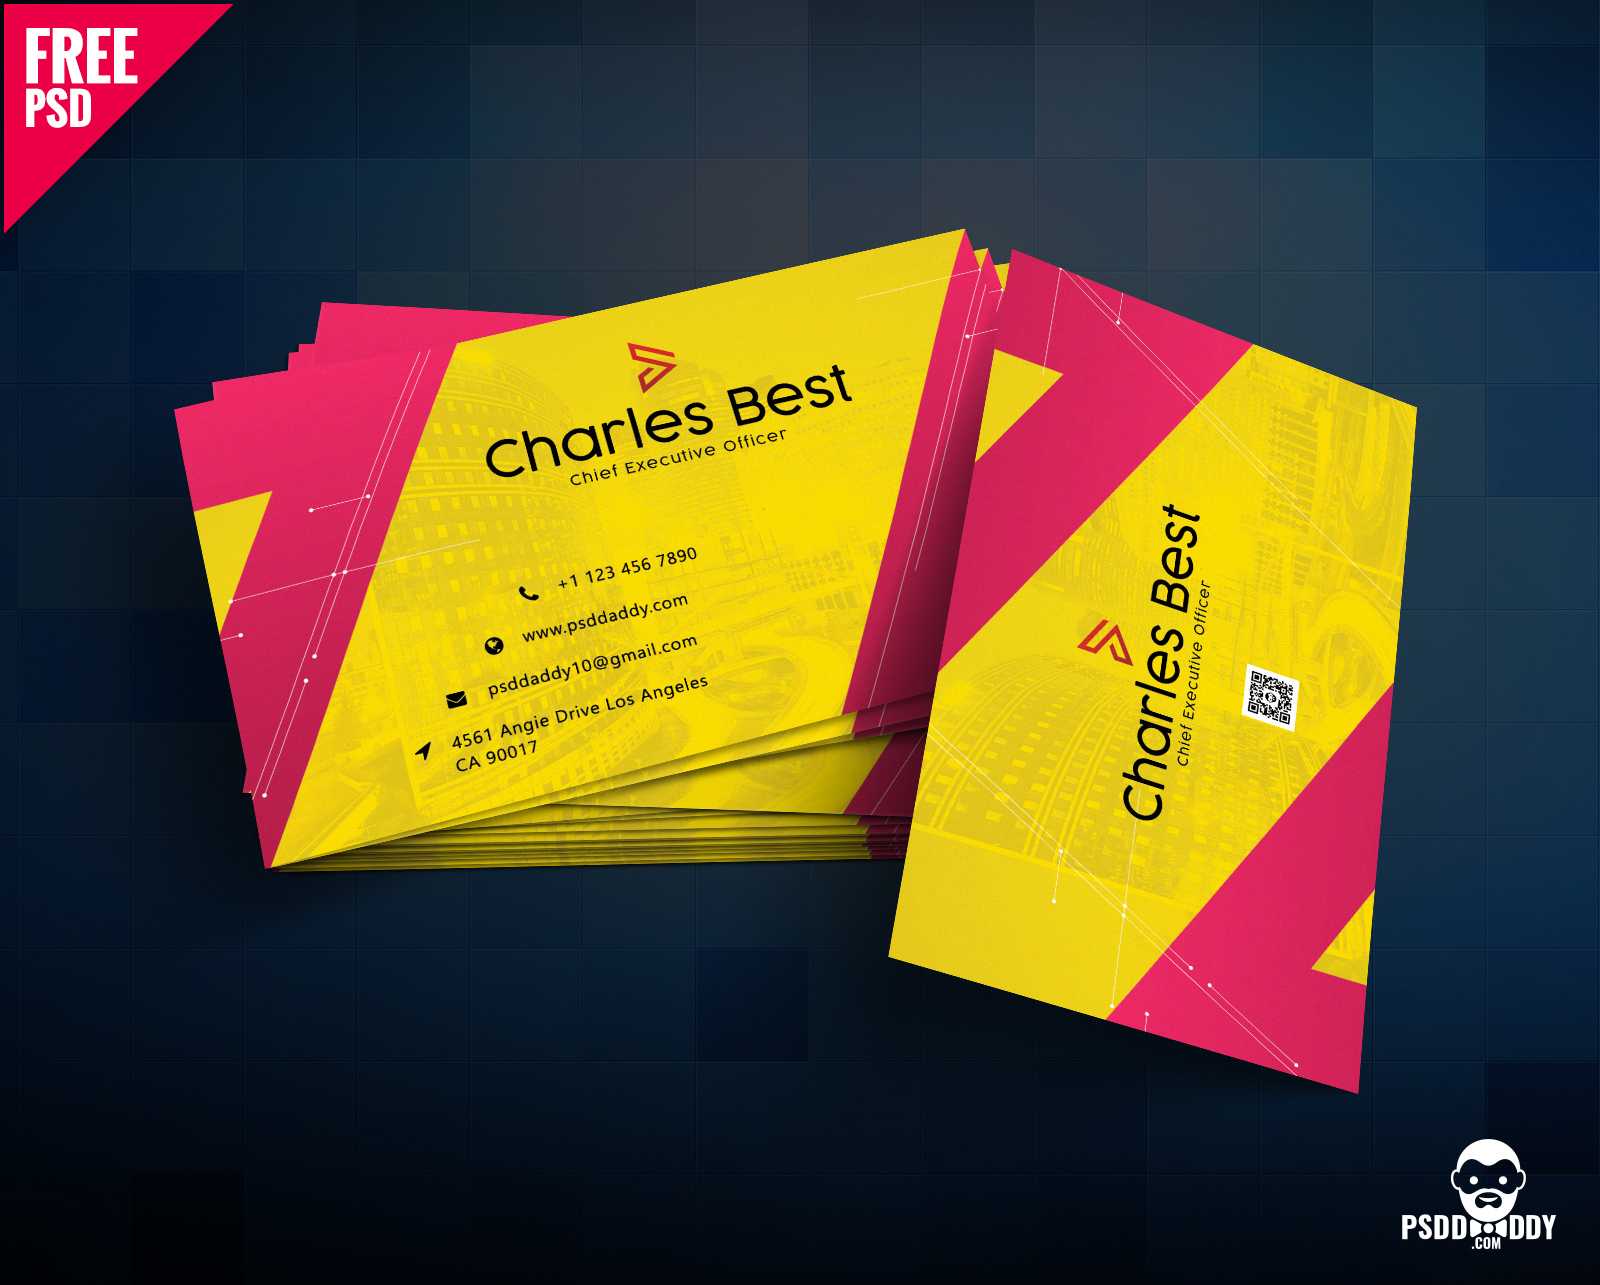 Download] Creative Business Card Free Psd | Psddaddy In Business Card Size Template Photoshop